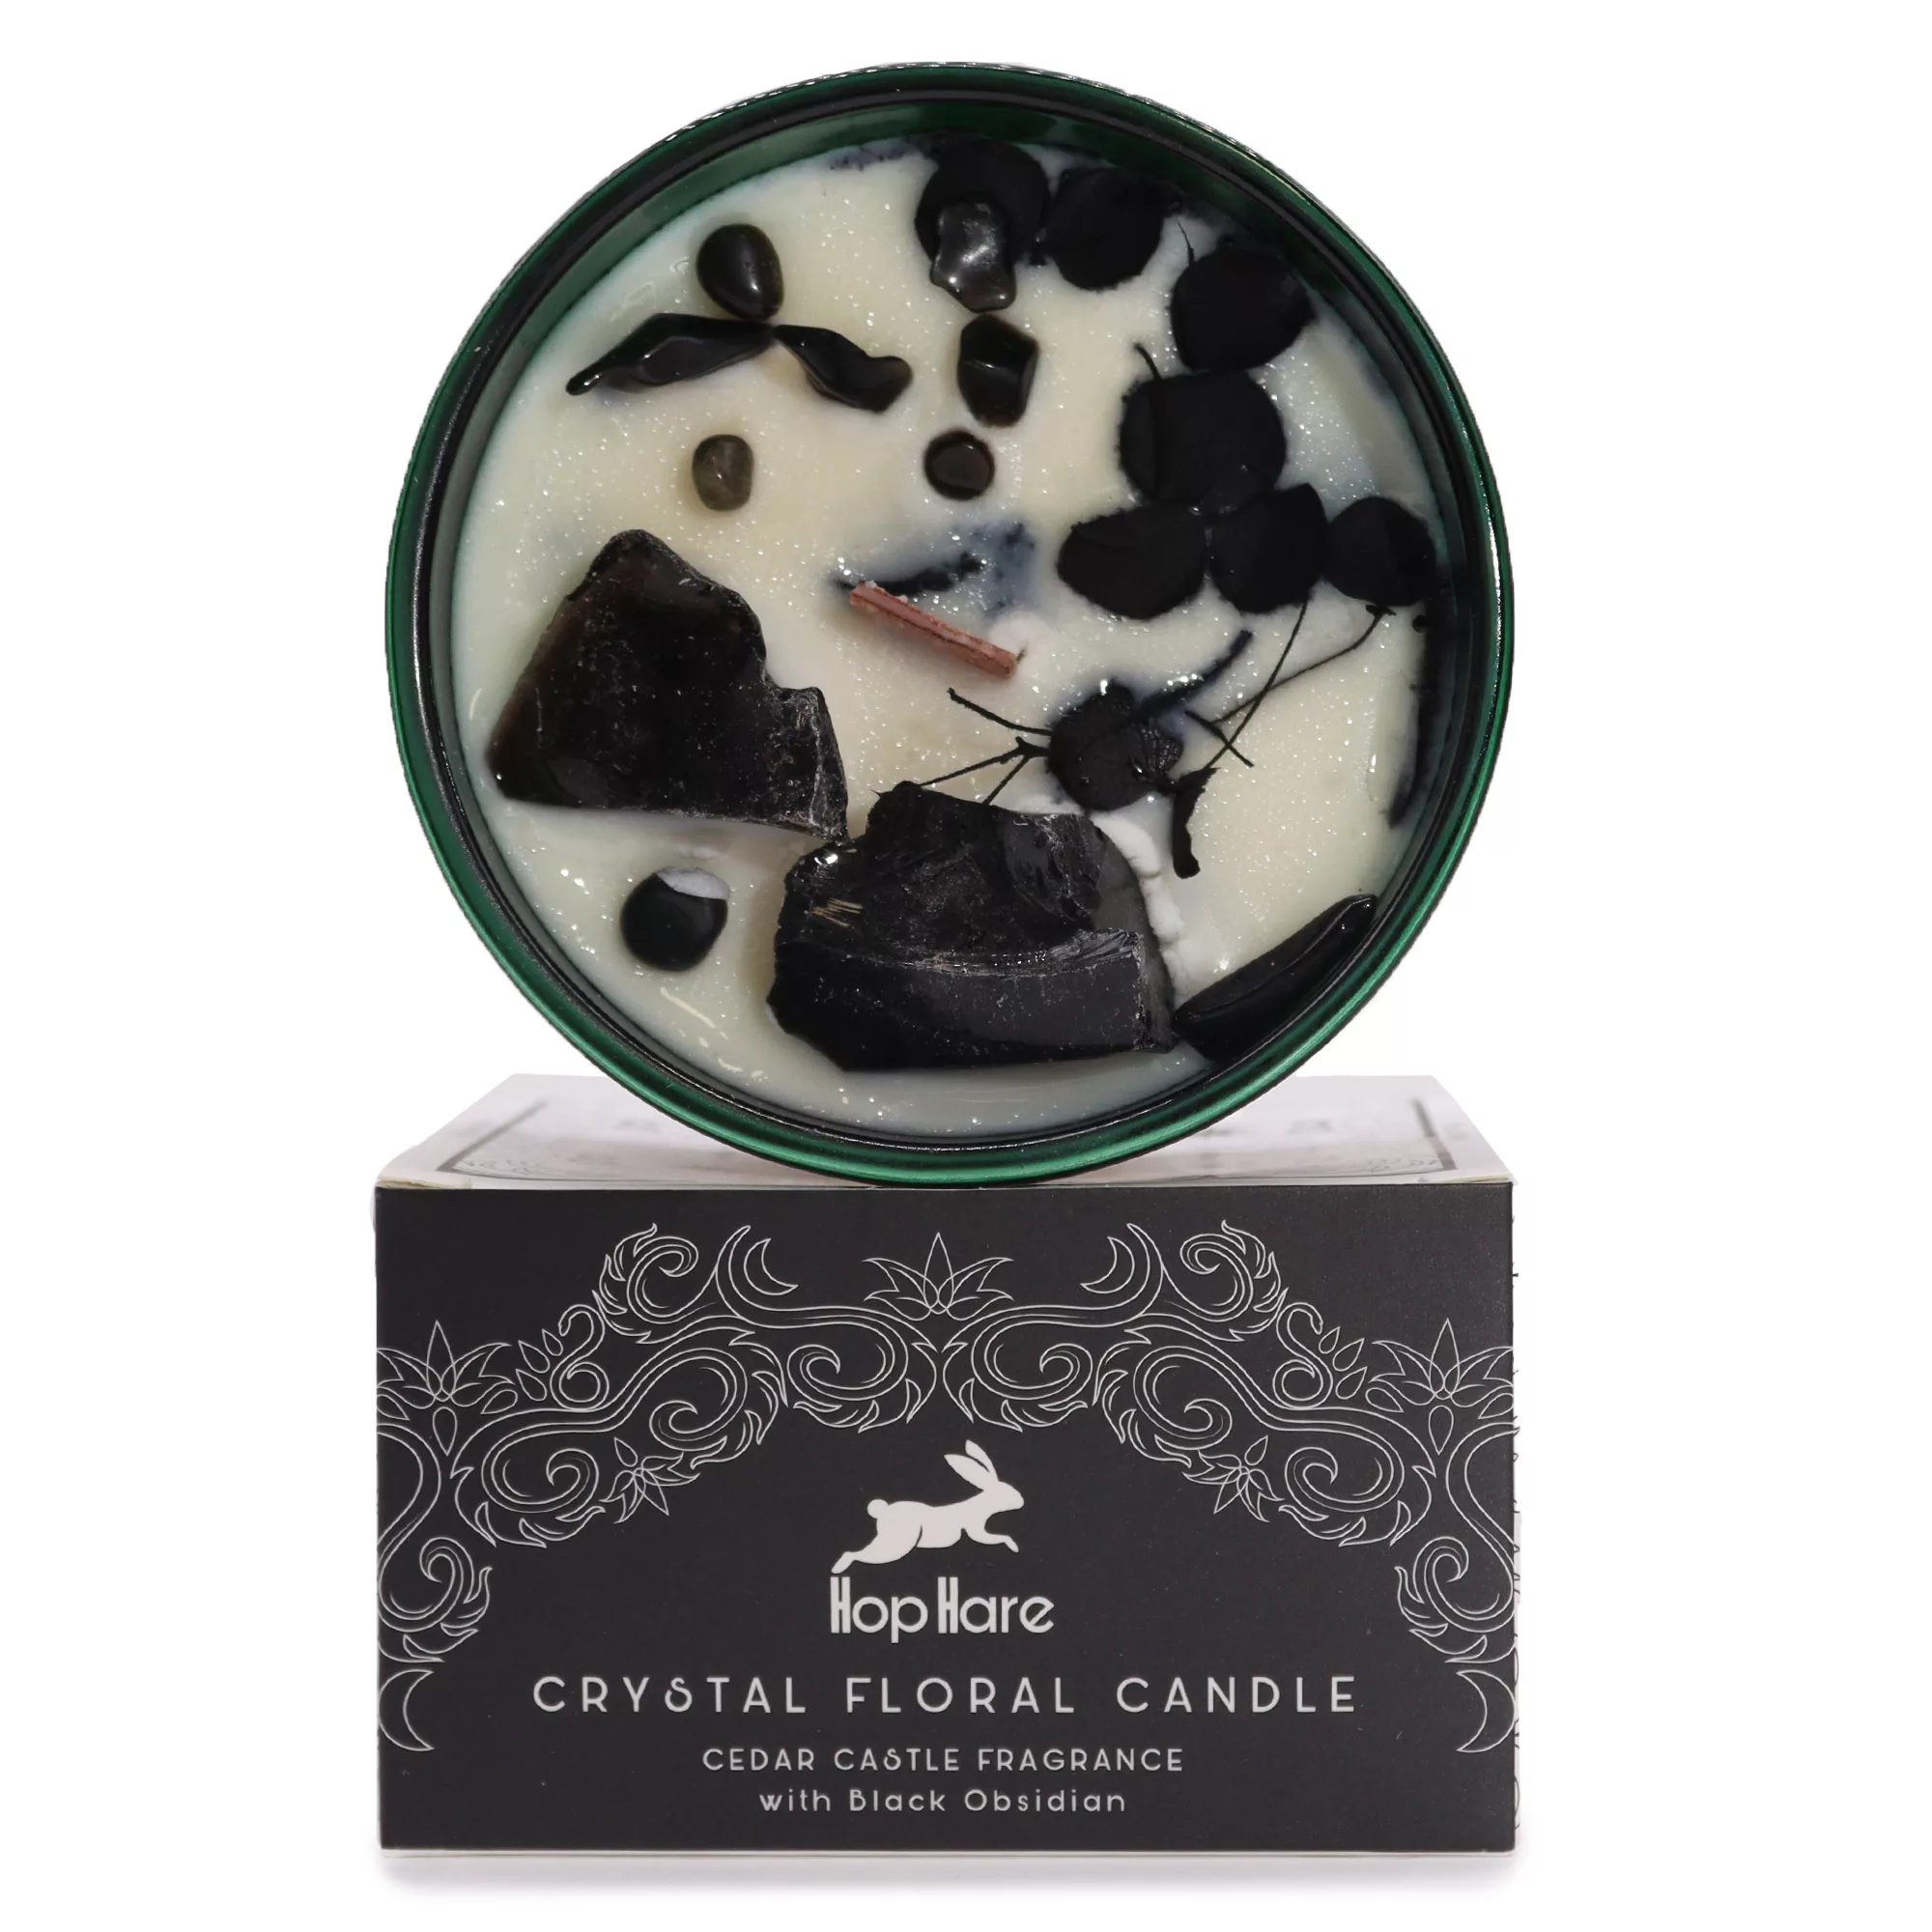 Hop Hare Crystal Magic Flower Candle – The Knight of Swords